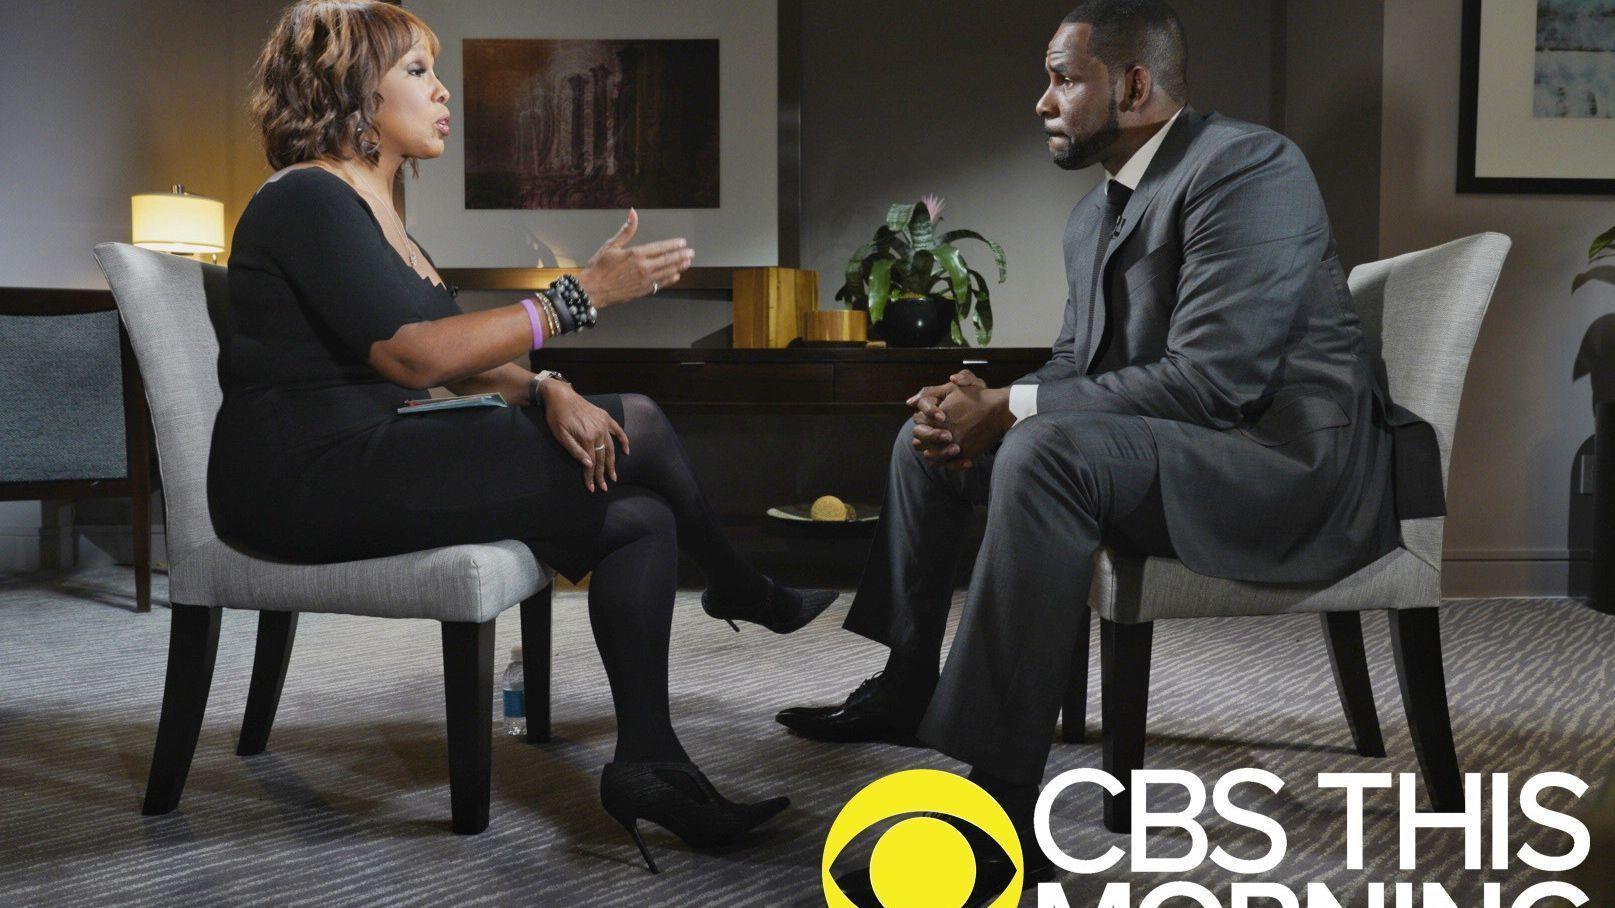 R. Kelly to CBS: 'I'm fighting for my life' - Orlando Sentinel1615 x 908